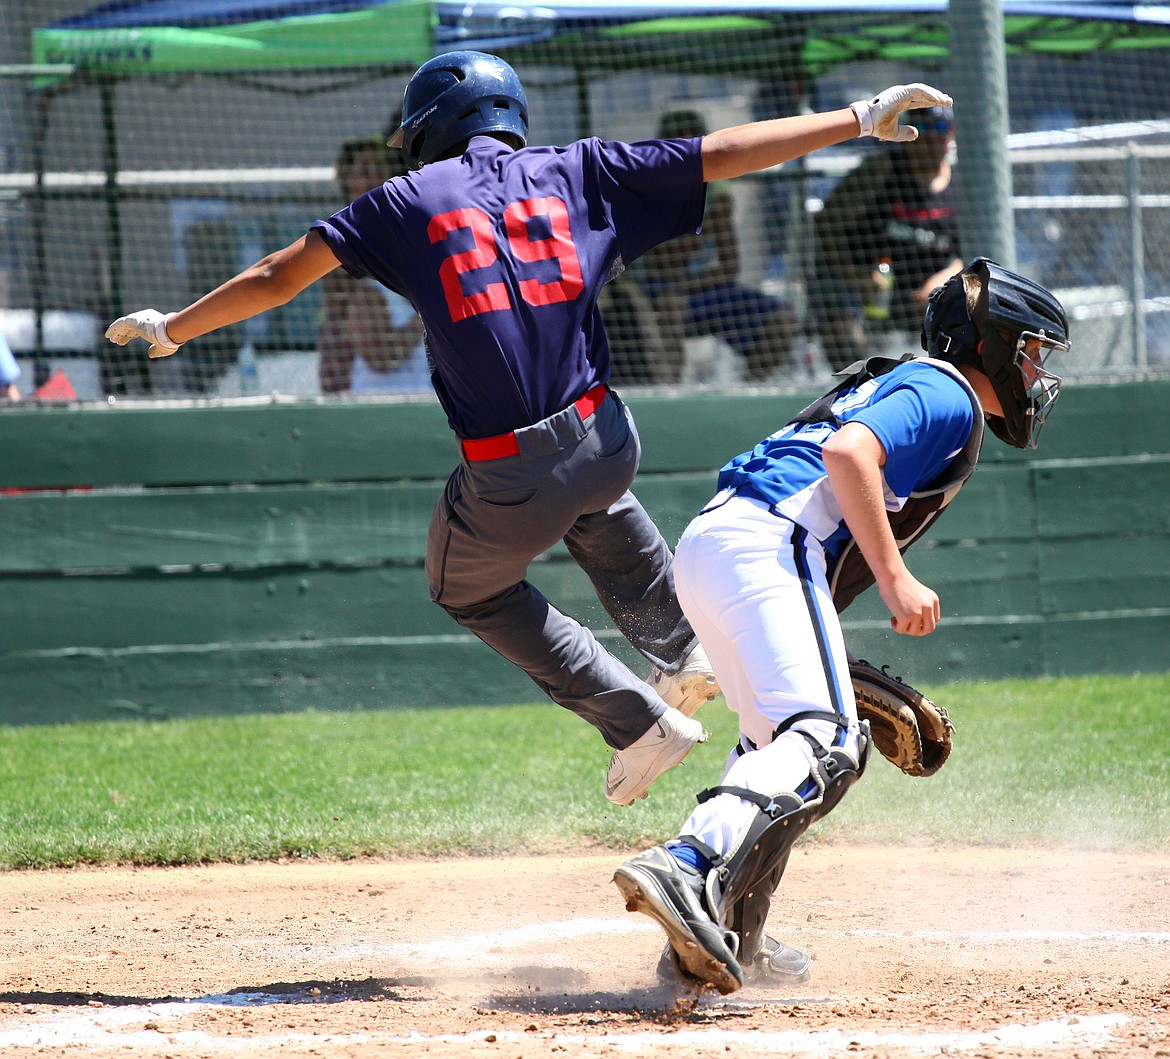 Rodney Harwood/Columbia Basin HeraldMoses Lake's Julian Egia is upended during a play at the plate during the North Washington 14-year-old Babe Ruth championship game on Friday at Johnson-O'Brien Stadium.